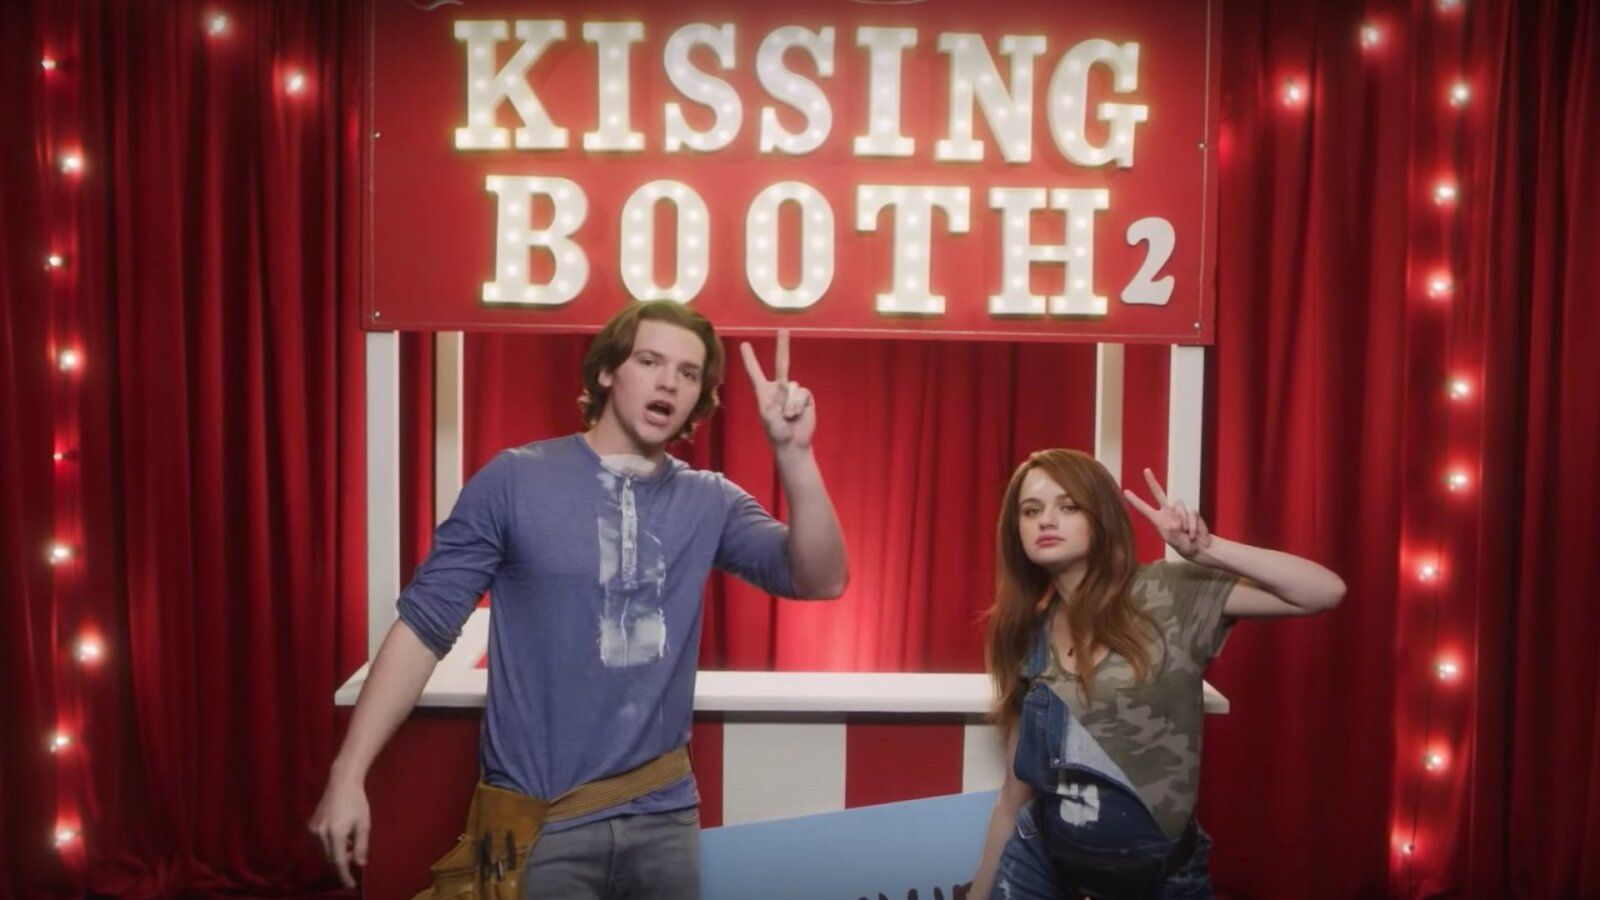 The Kissing Booth 2 Is One Of The Finest TEEN Movies Of The Year